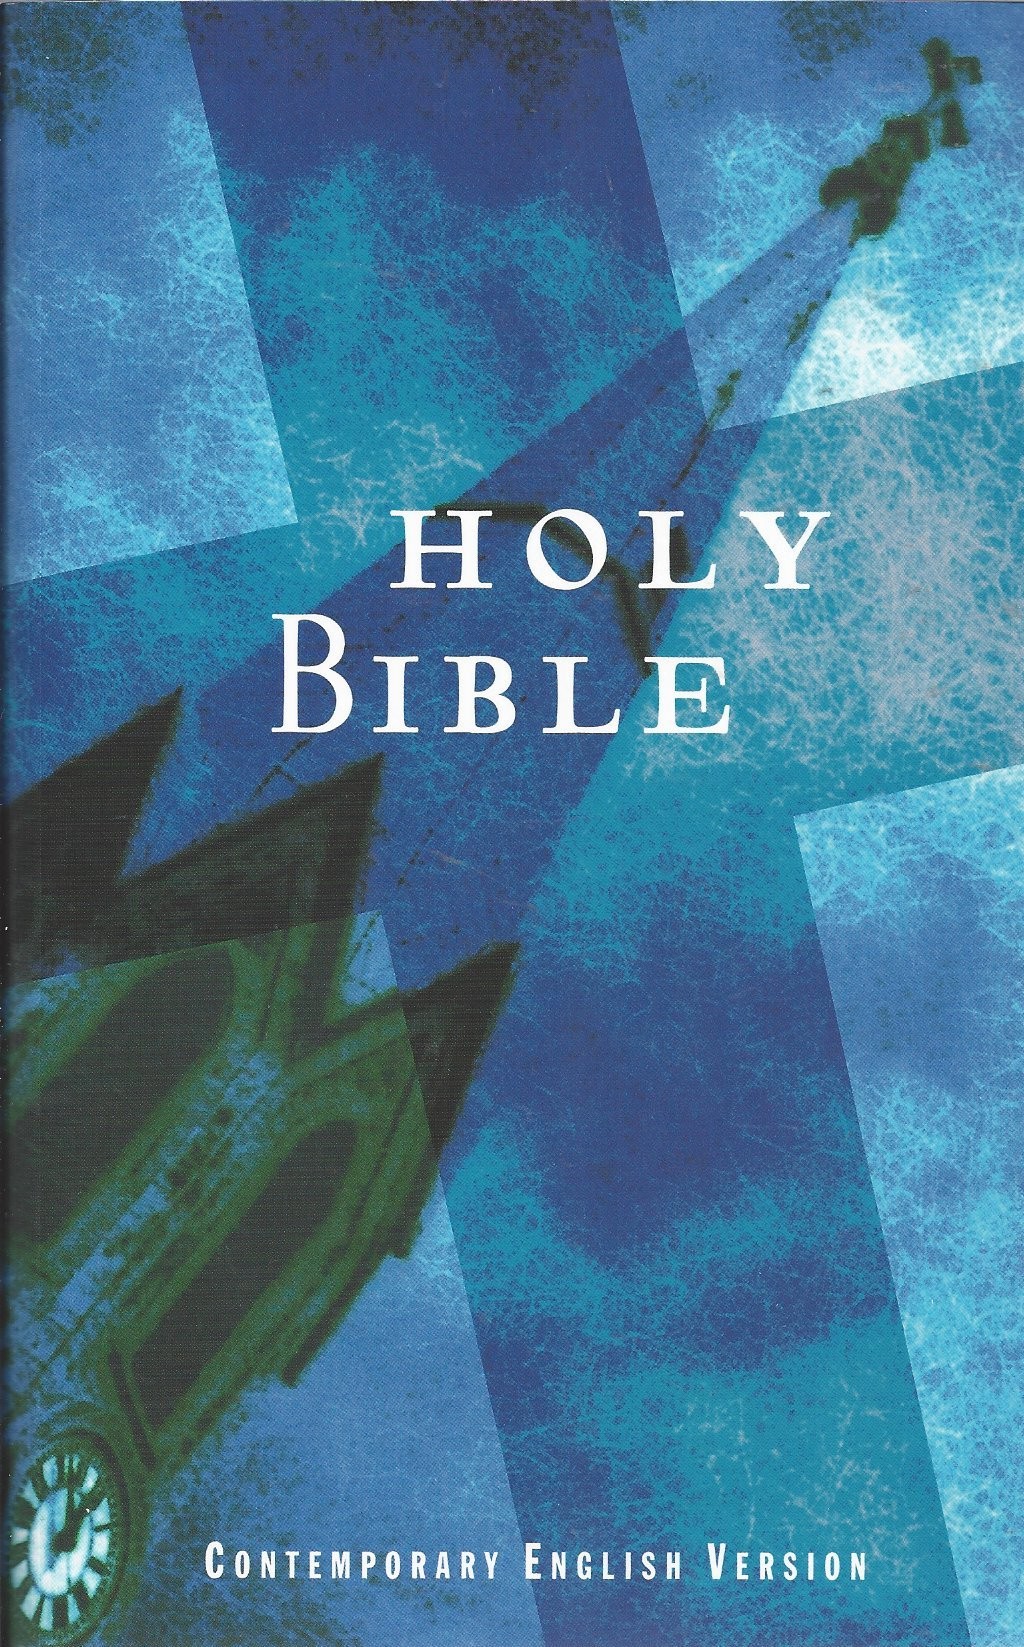 Holy Bible  Contemporary English Version  (1995)  Front